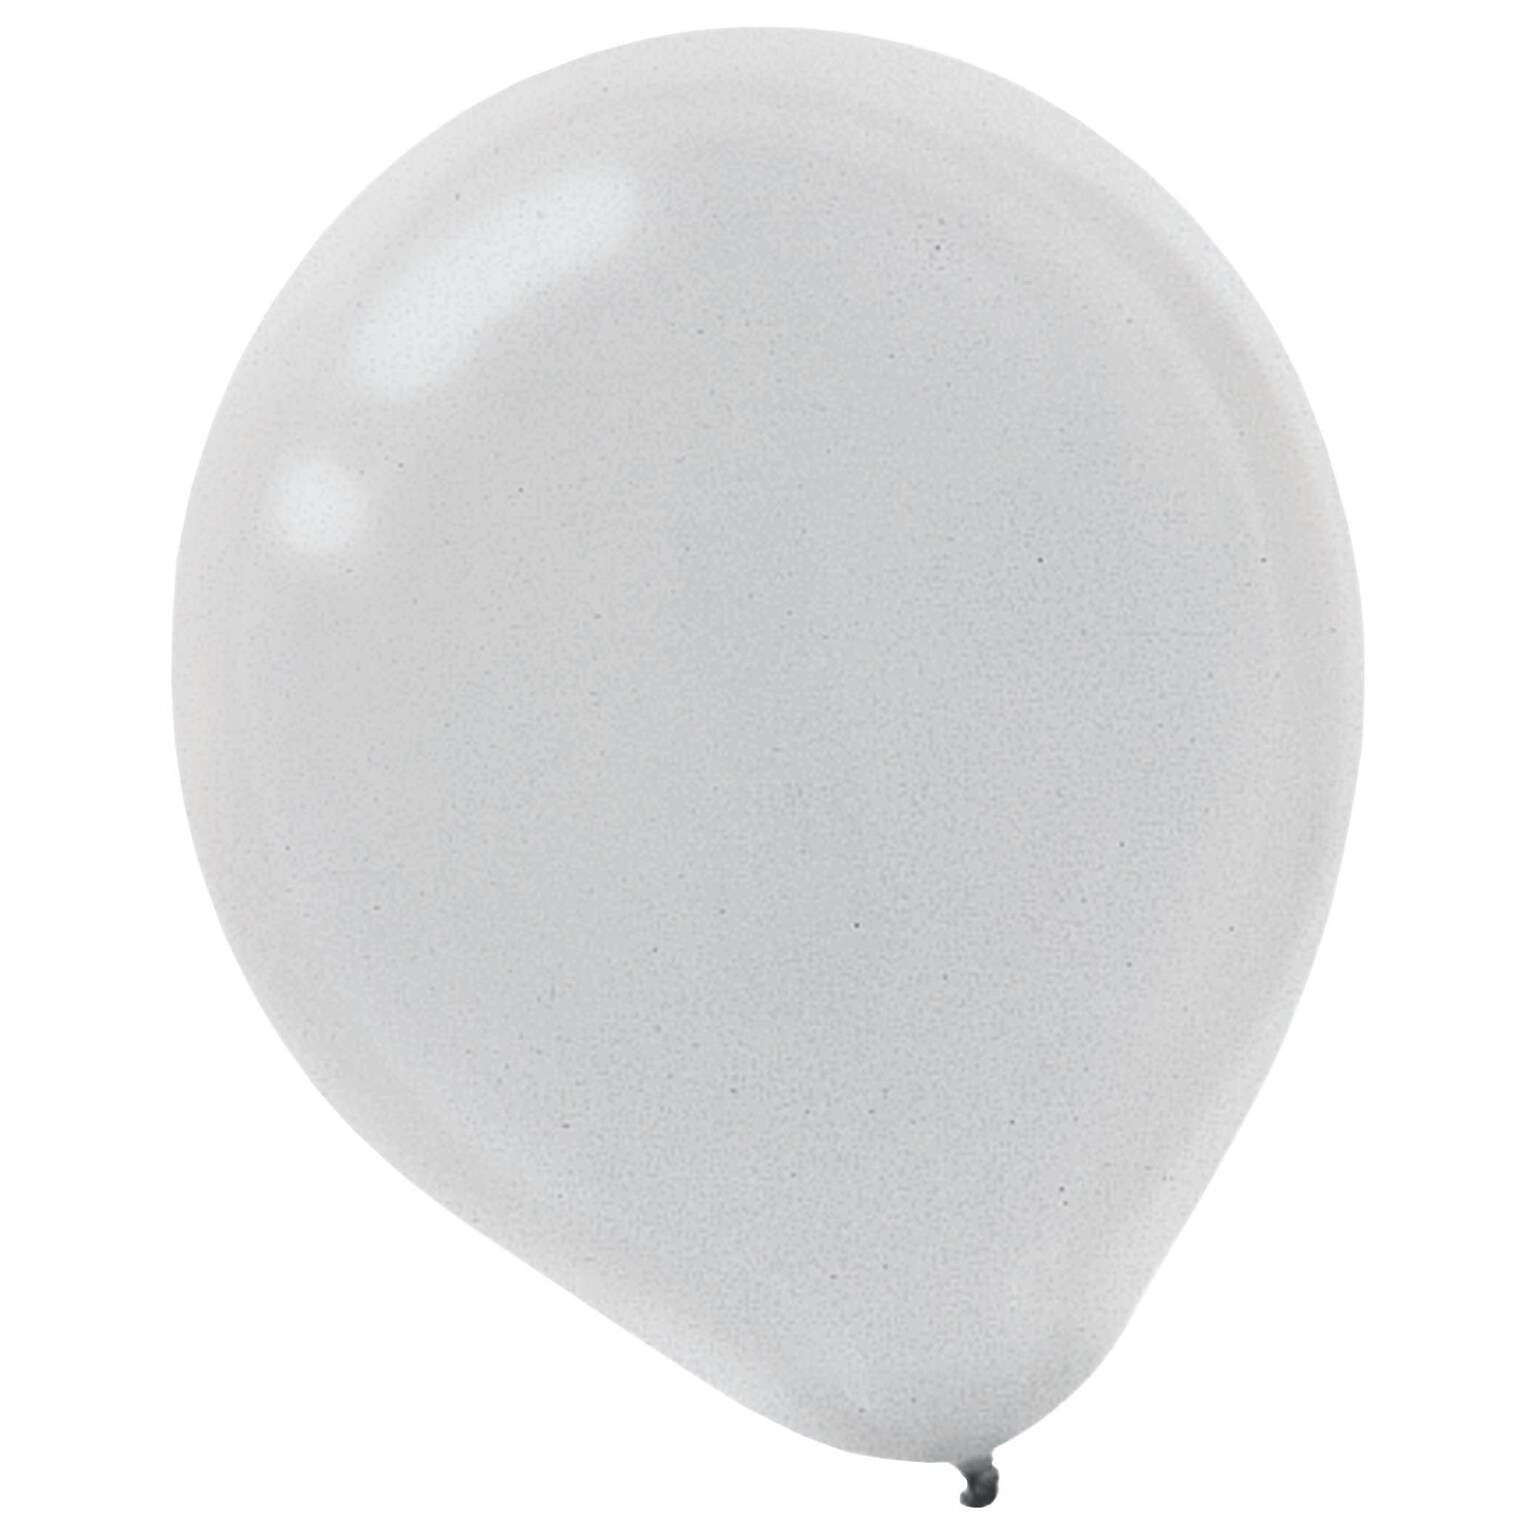 Amscan Pearlized Latex Balloons Packaged, 12, 16/Pack, Silver, 15 Per Pack (113253.18)